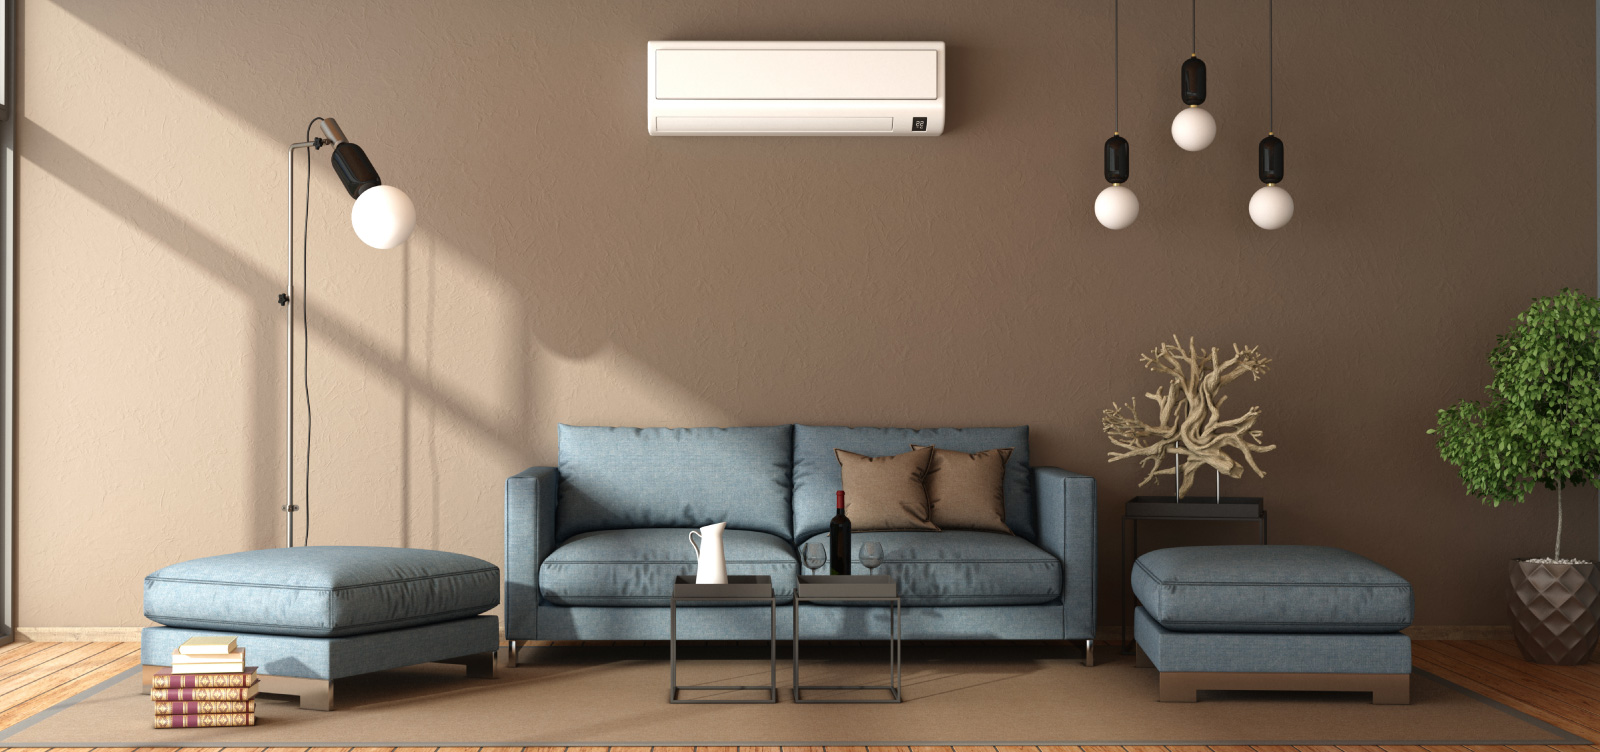 The Joy of Quality Heating and Cooling